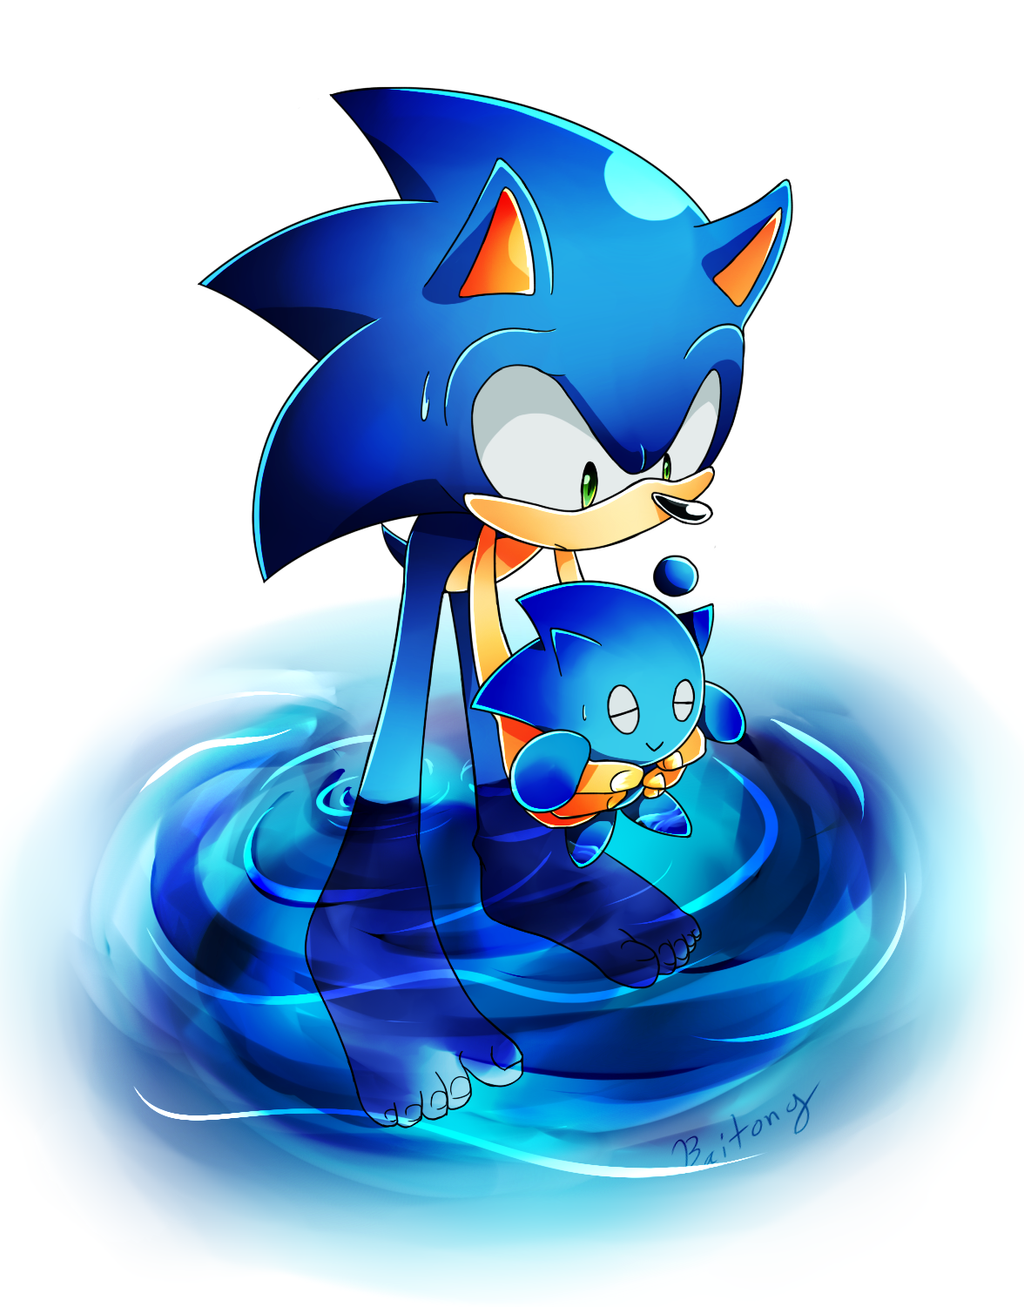 Sonic by Baitong9194 on DeviantArt